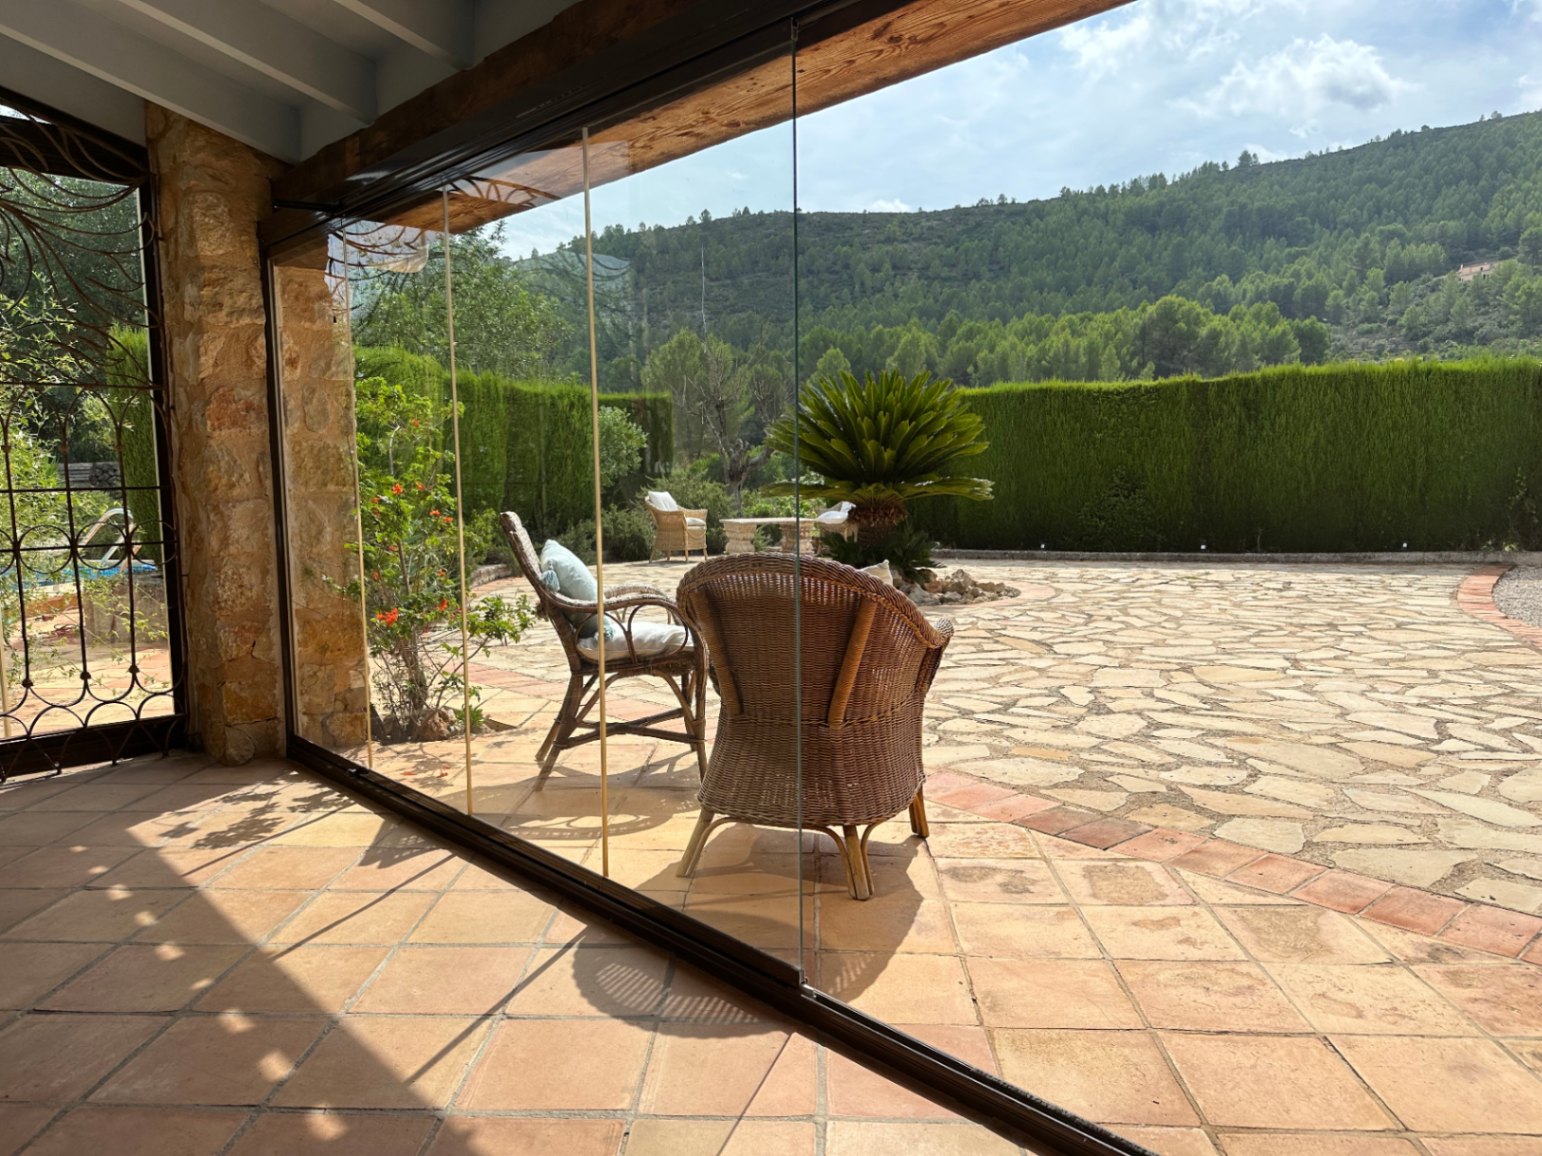 EXCLUSIVEThis beautiful traditional finca is located in the Jalon area and features